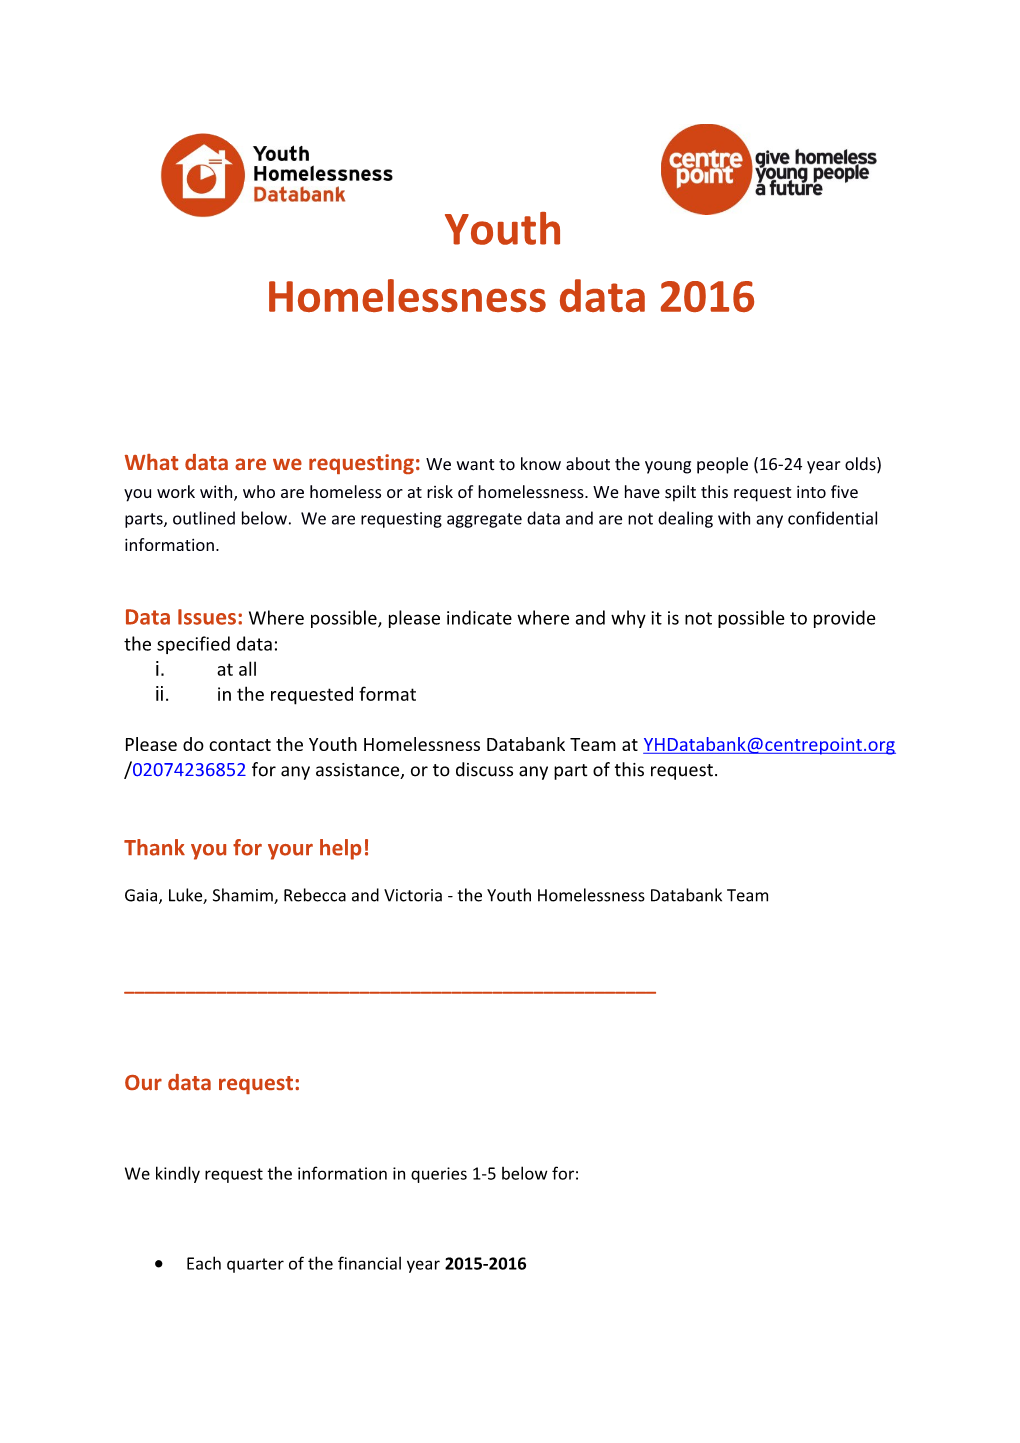 Youth Homelessness Data 2016